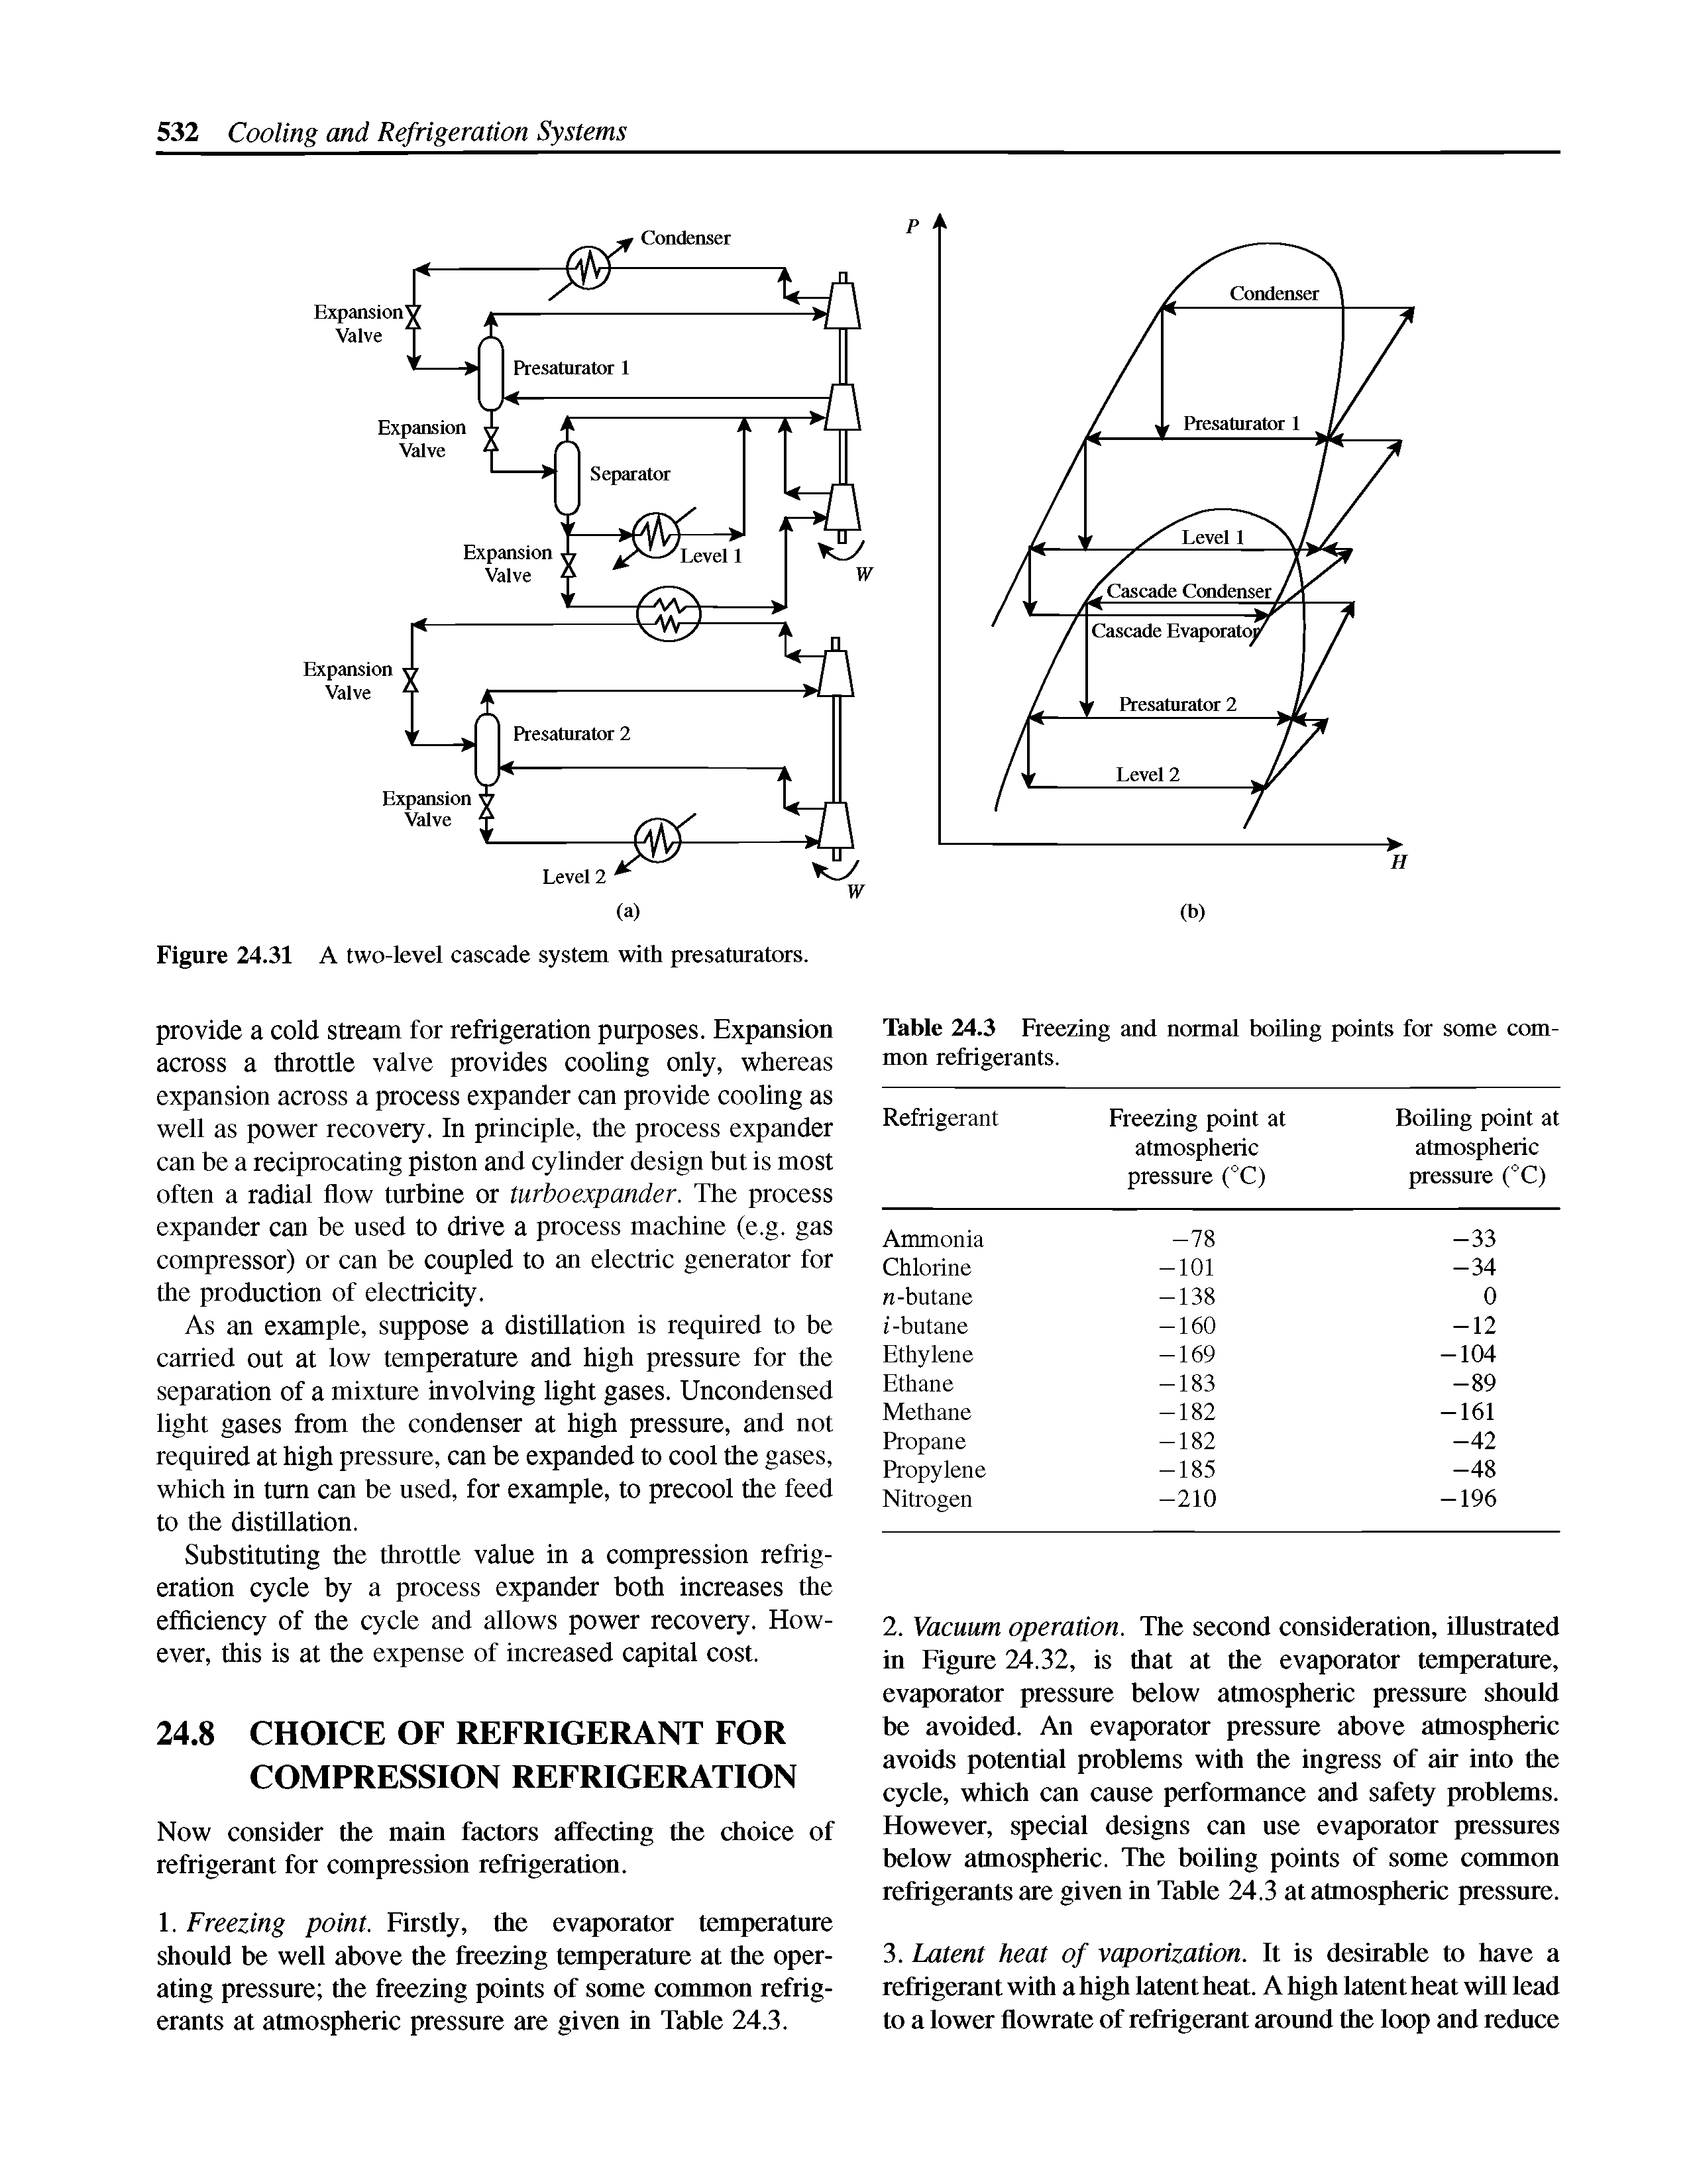 Figure 24.31 A two-level cascade system with presaturators.